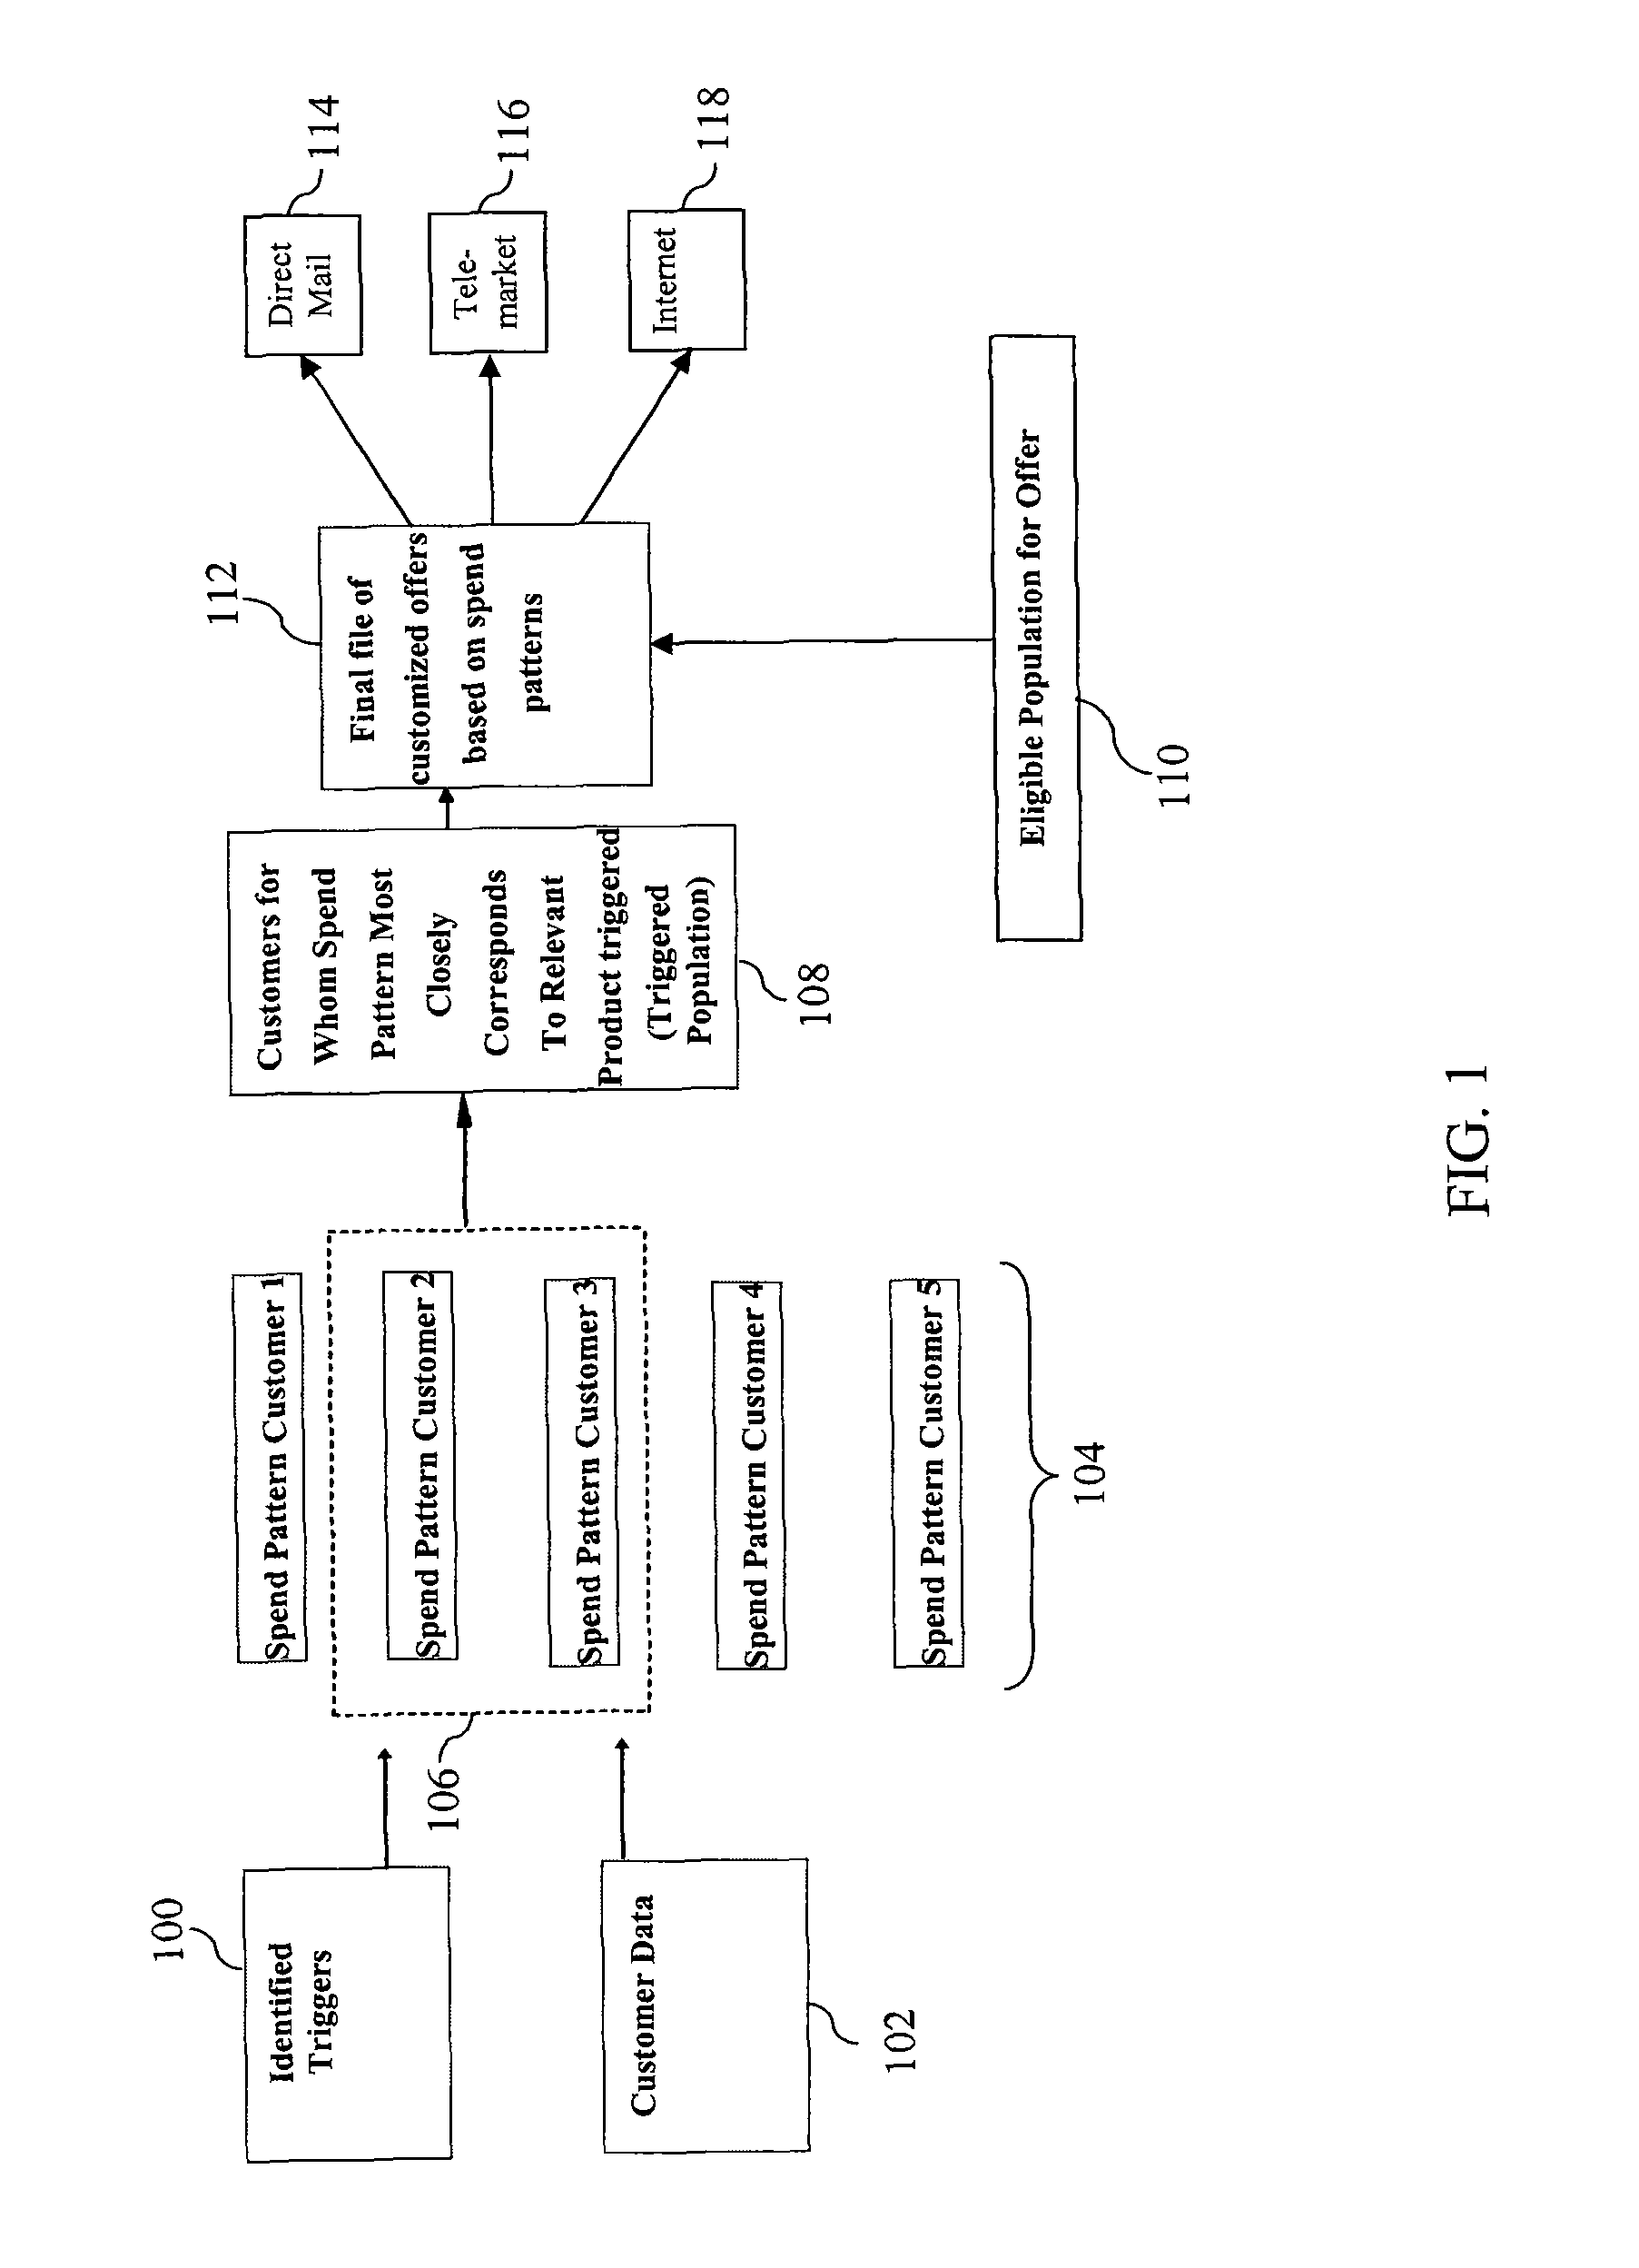 System and method for targeting transaction account product holders to receive upgraded transaction account products